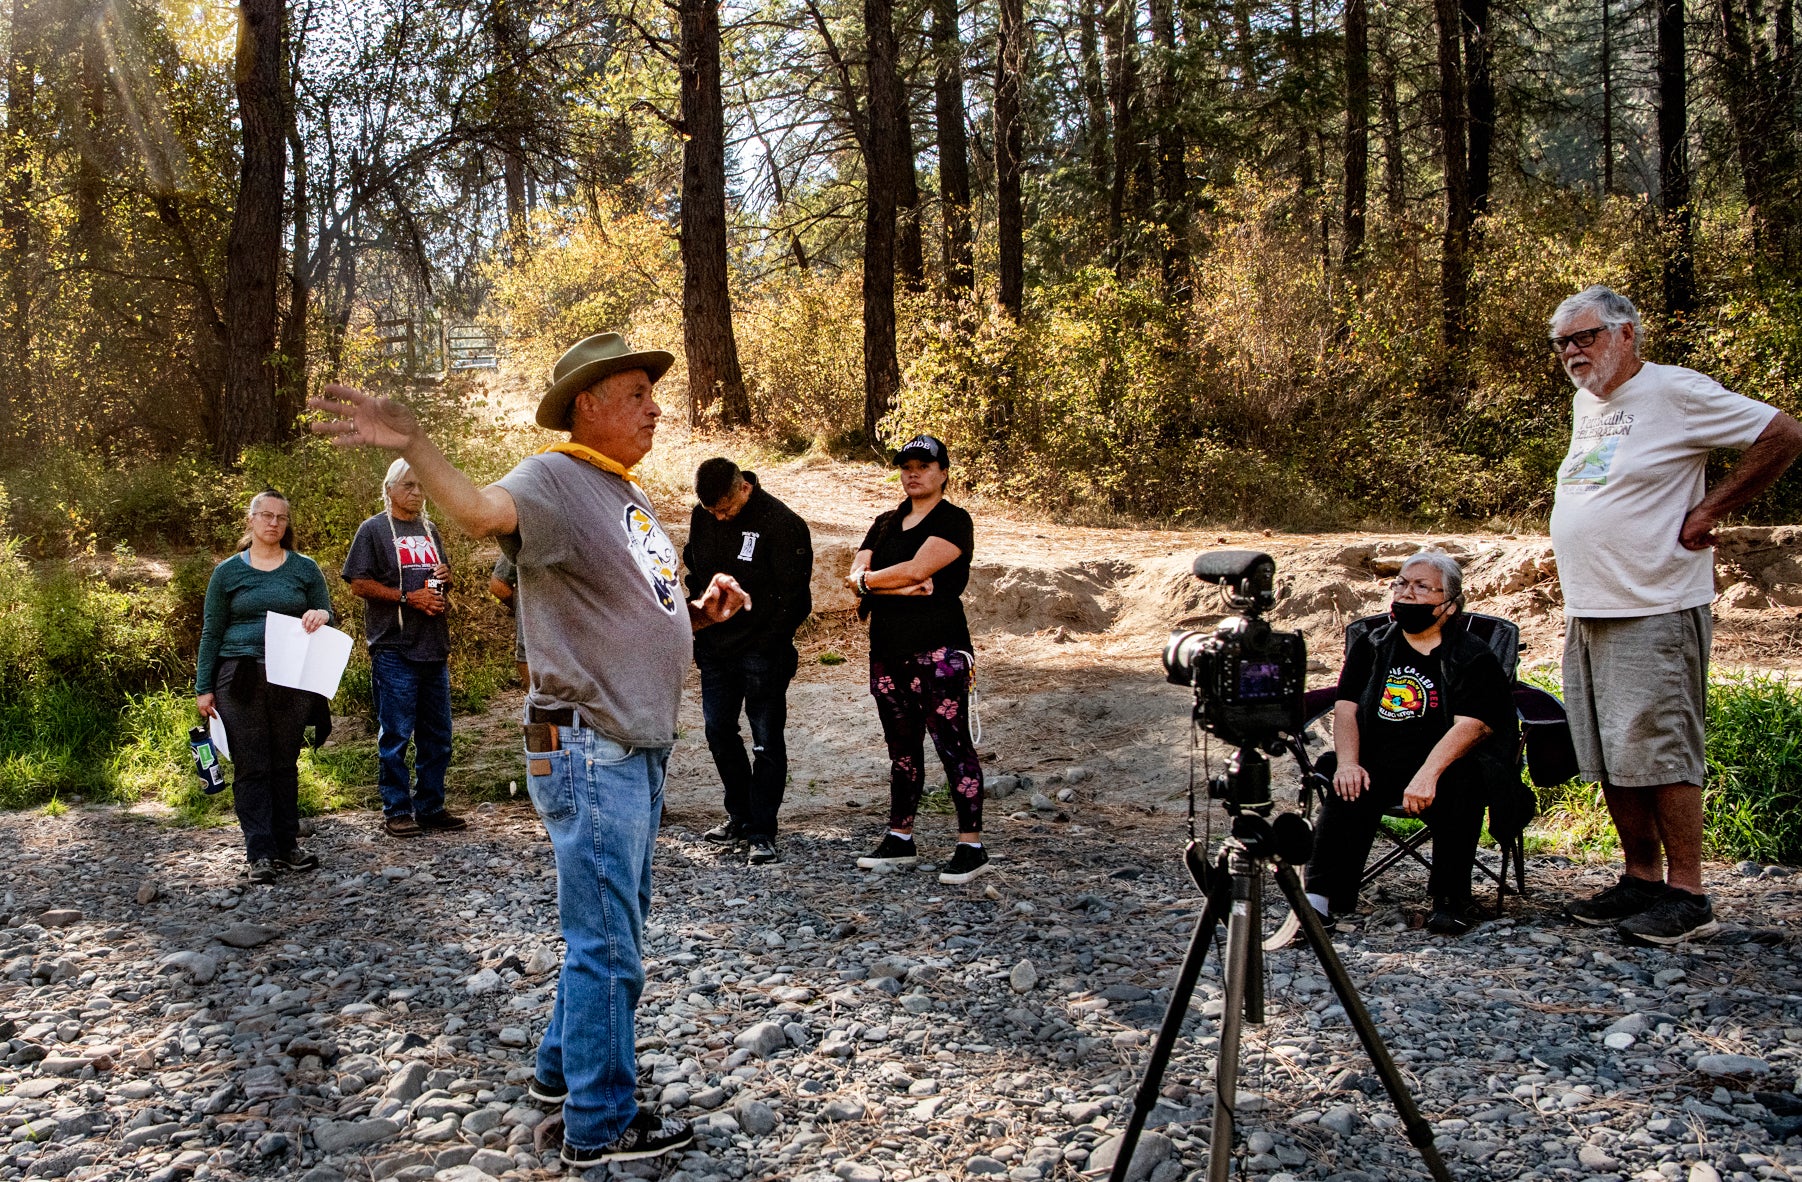 An Indigenous man tells a story to a group of Indigenous and white people in a forest. A camera is filming him.